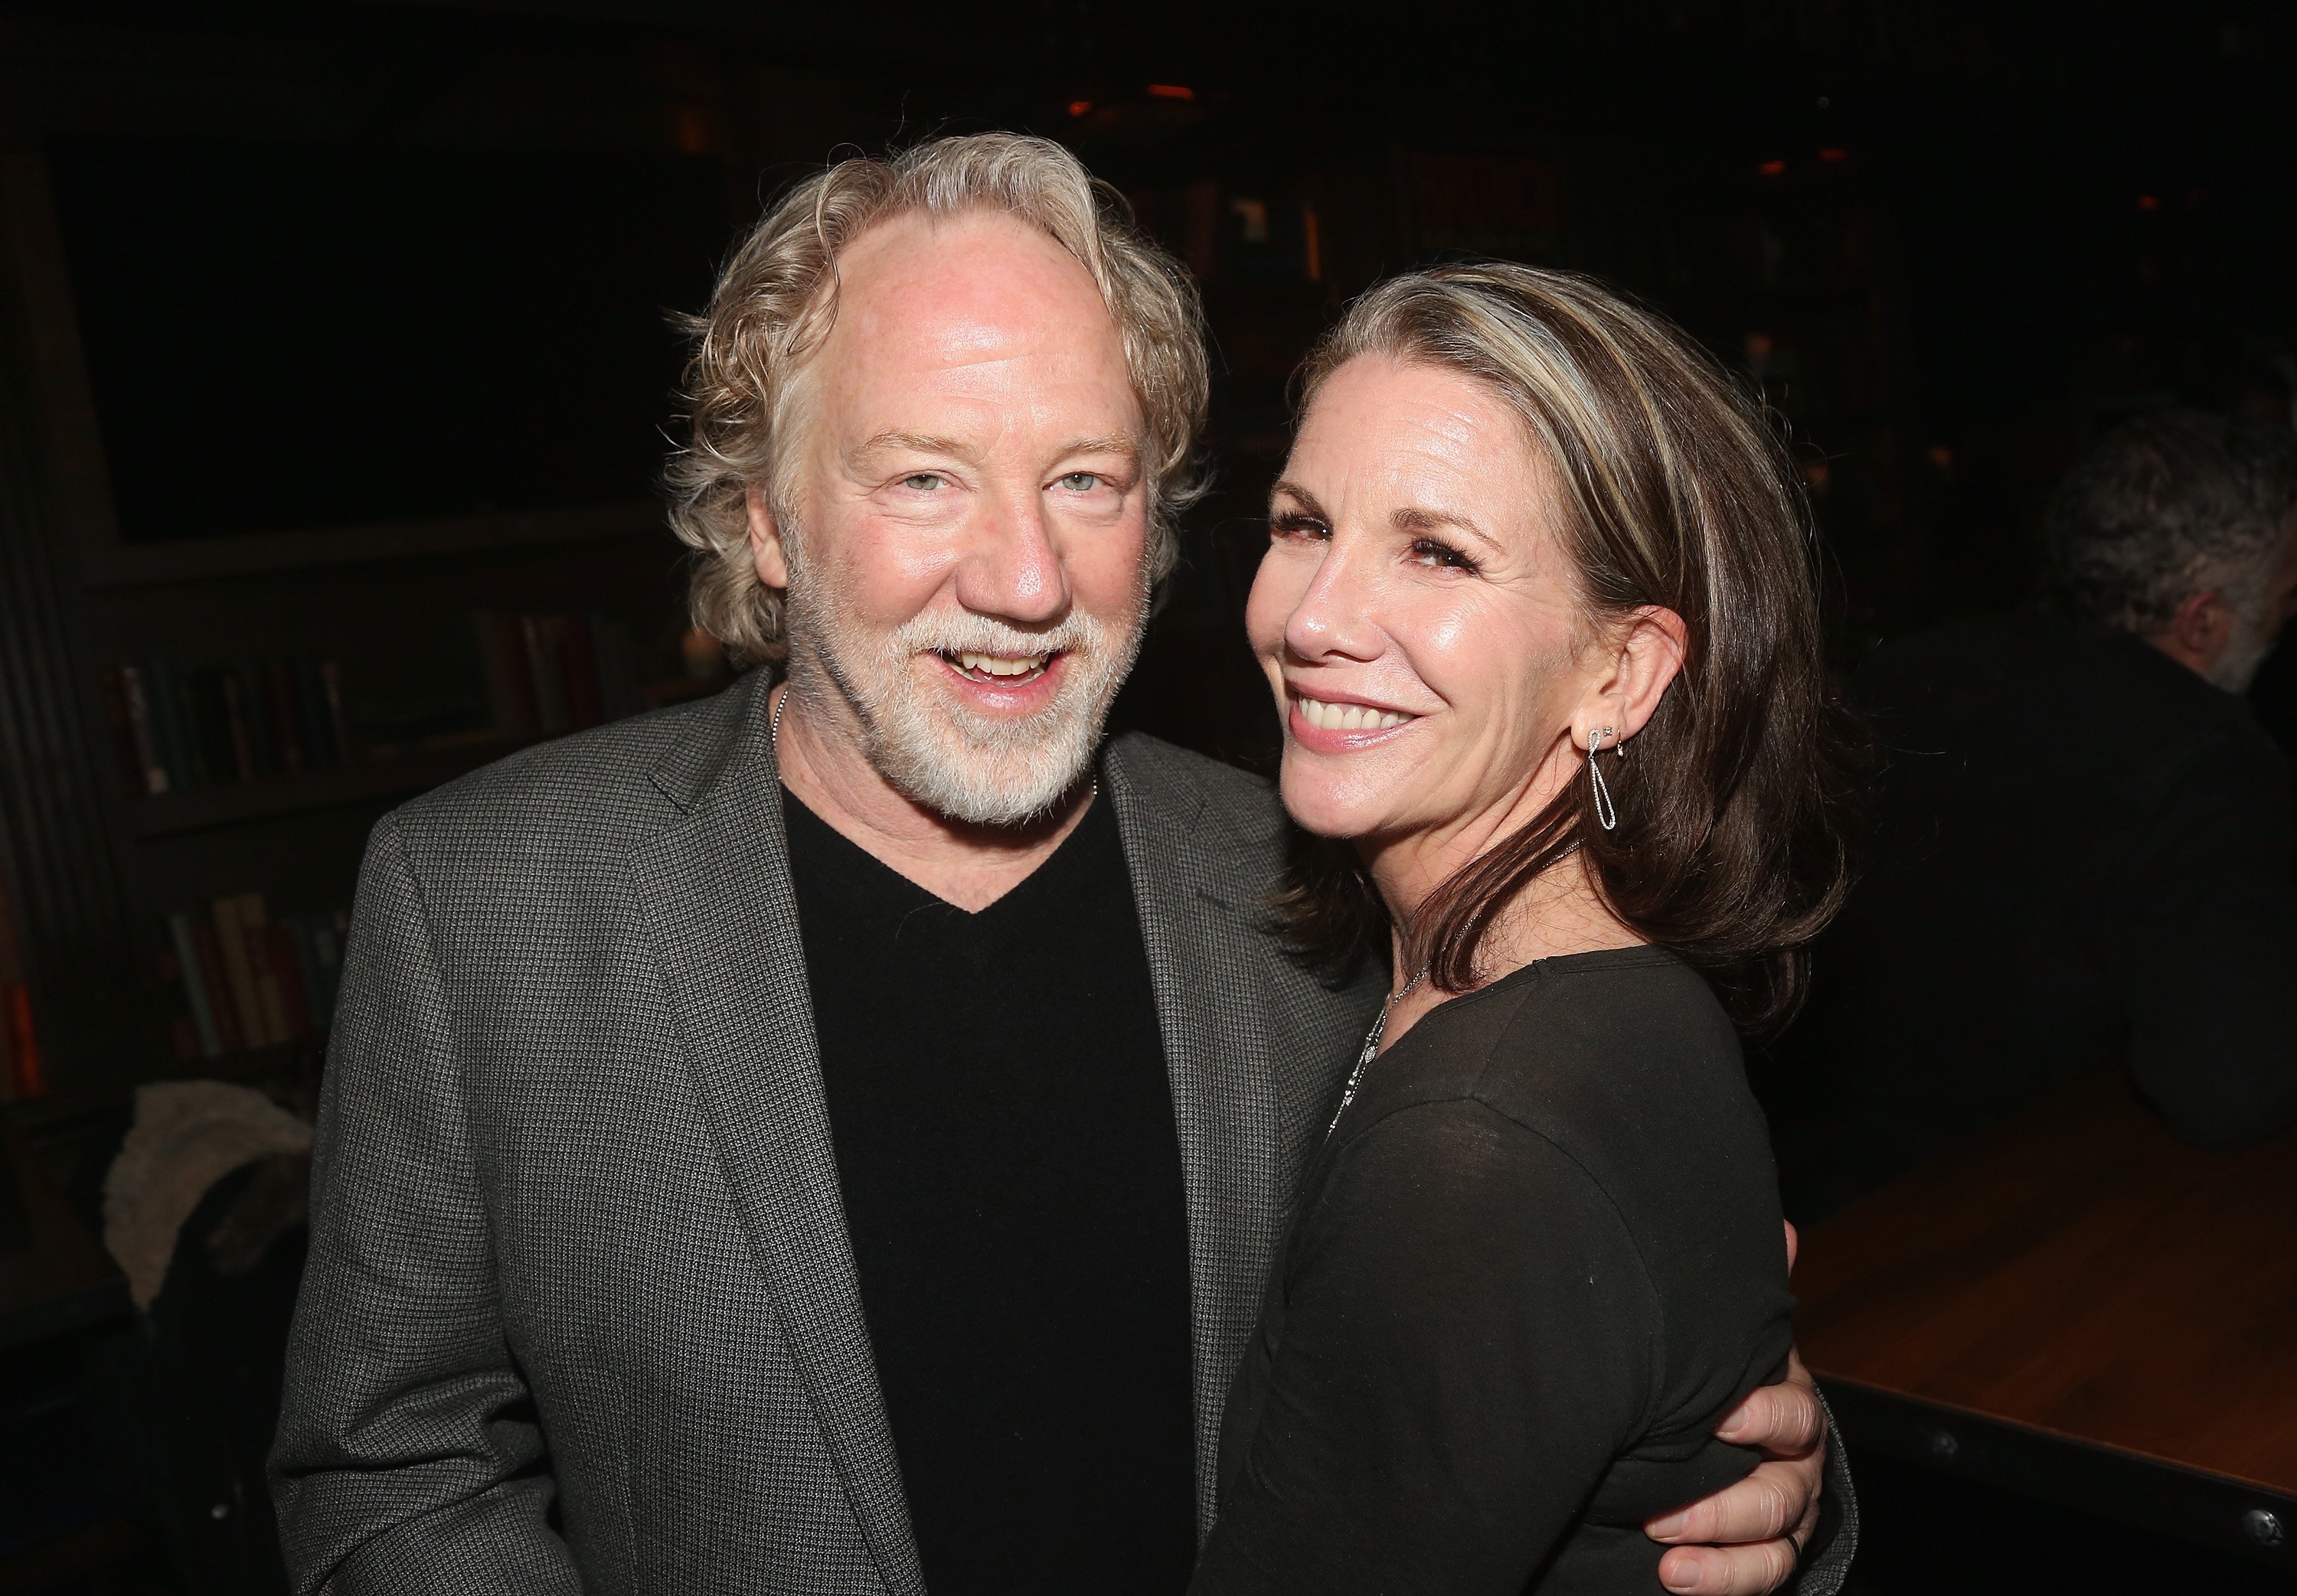  Timothy Busfield and wife Melissa Gilbert pose at the opening night after party for Irish Rep's production of "The Seafarer"at Crompton Ale House on April 18, 2018 in New York City | Source: Getty Images